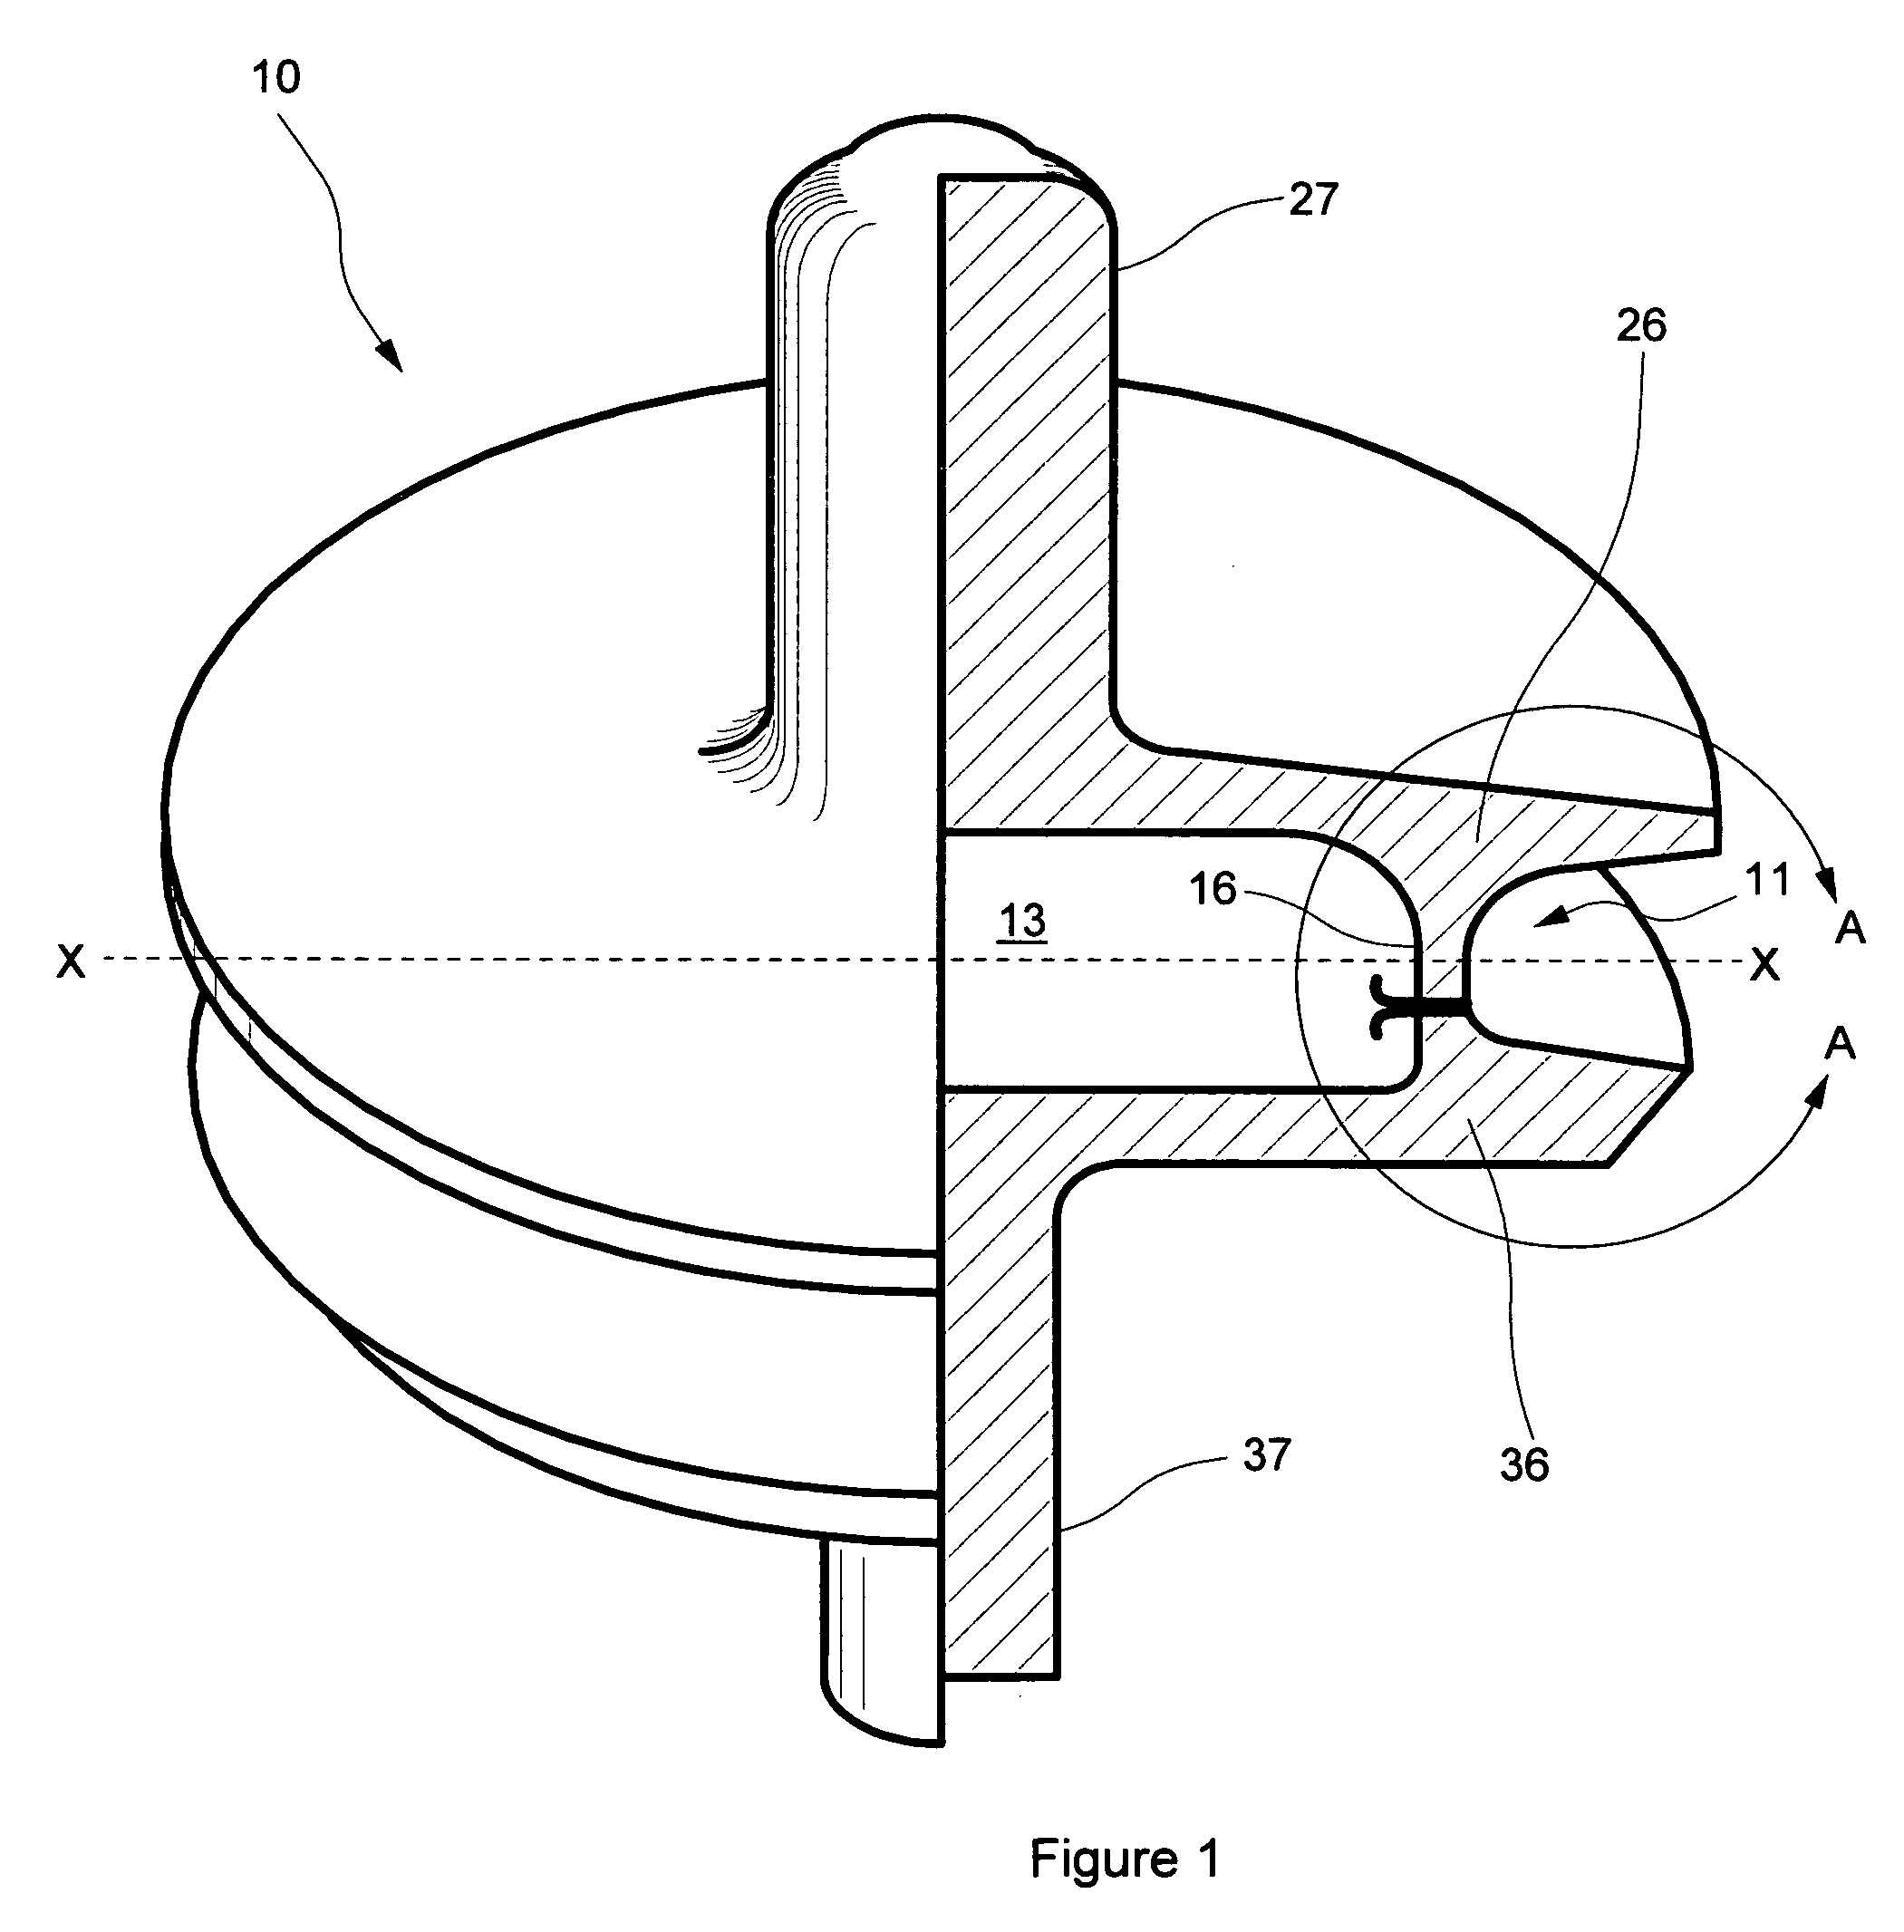 Valve body with integral seal retention groove